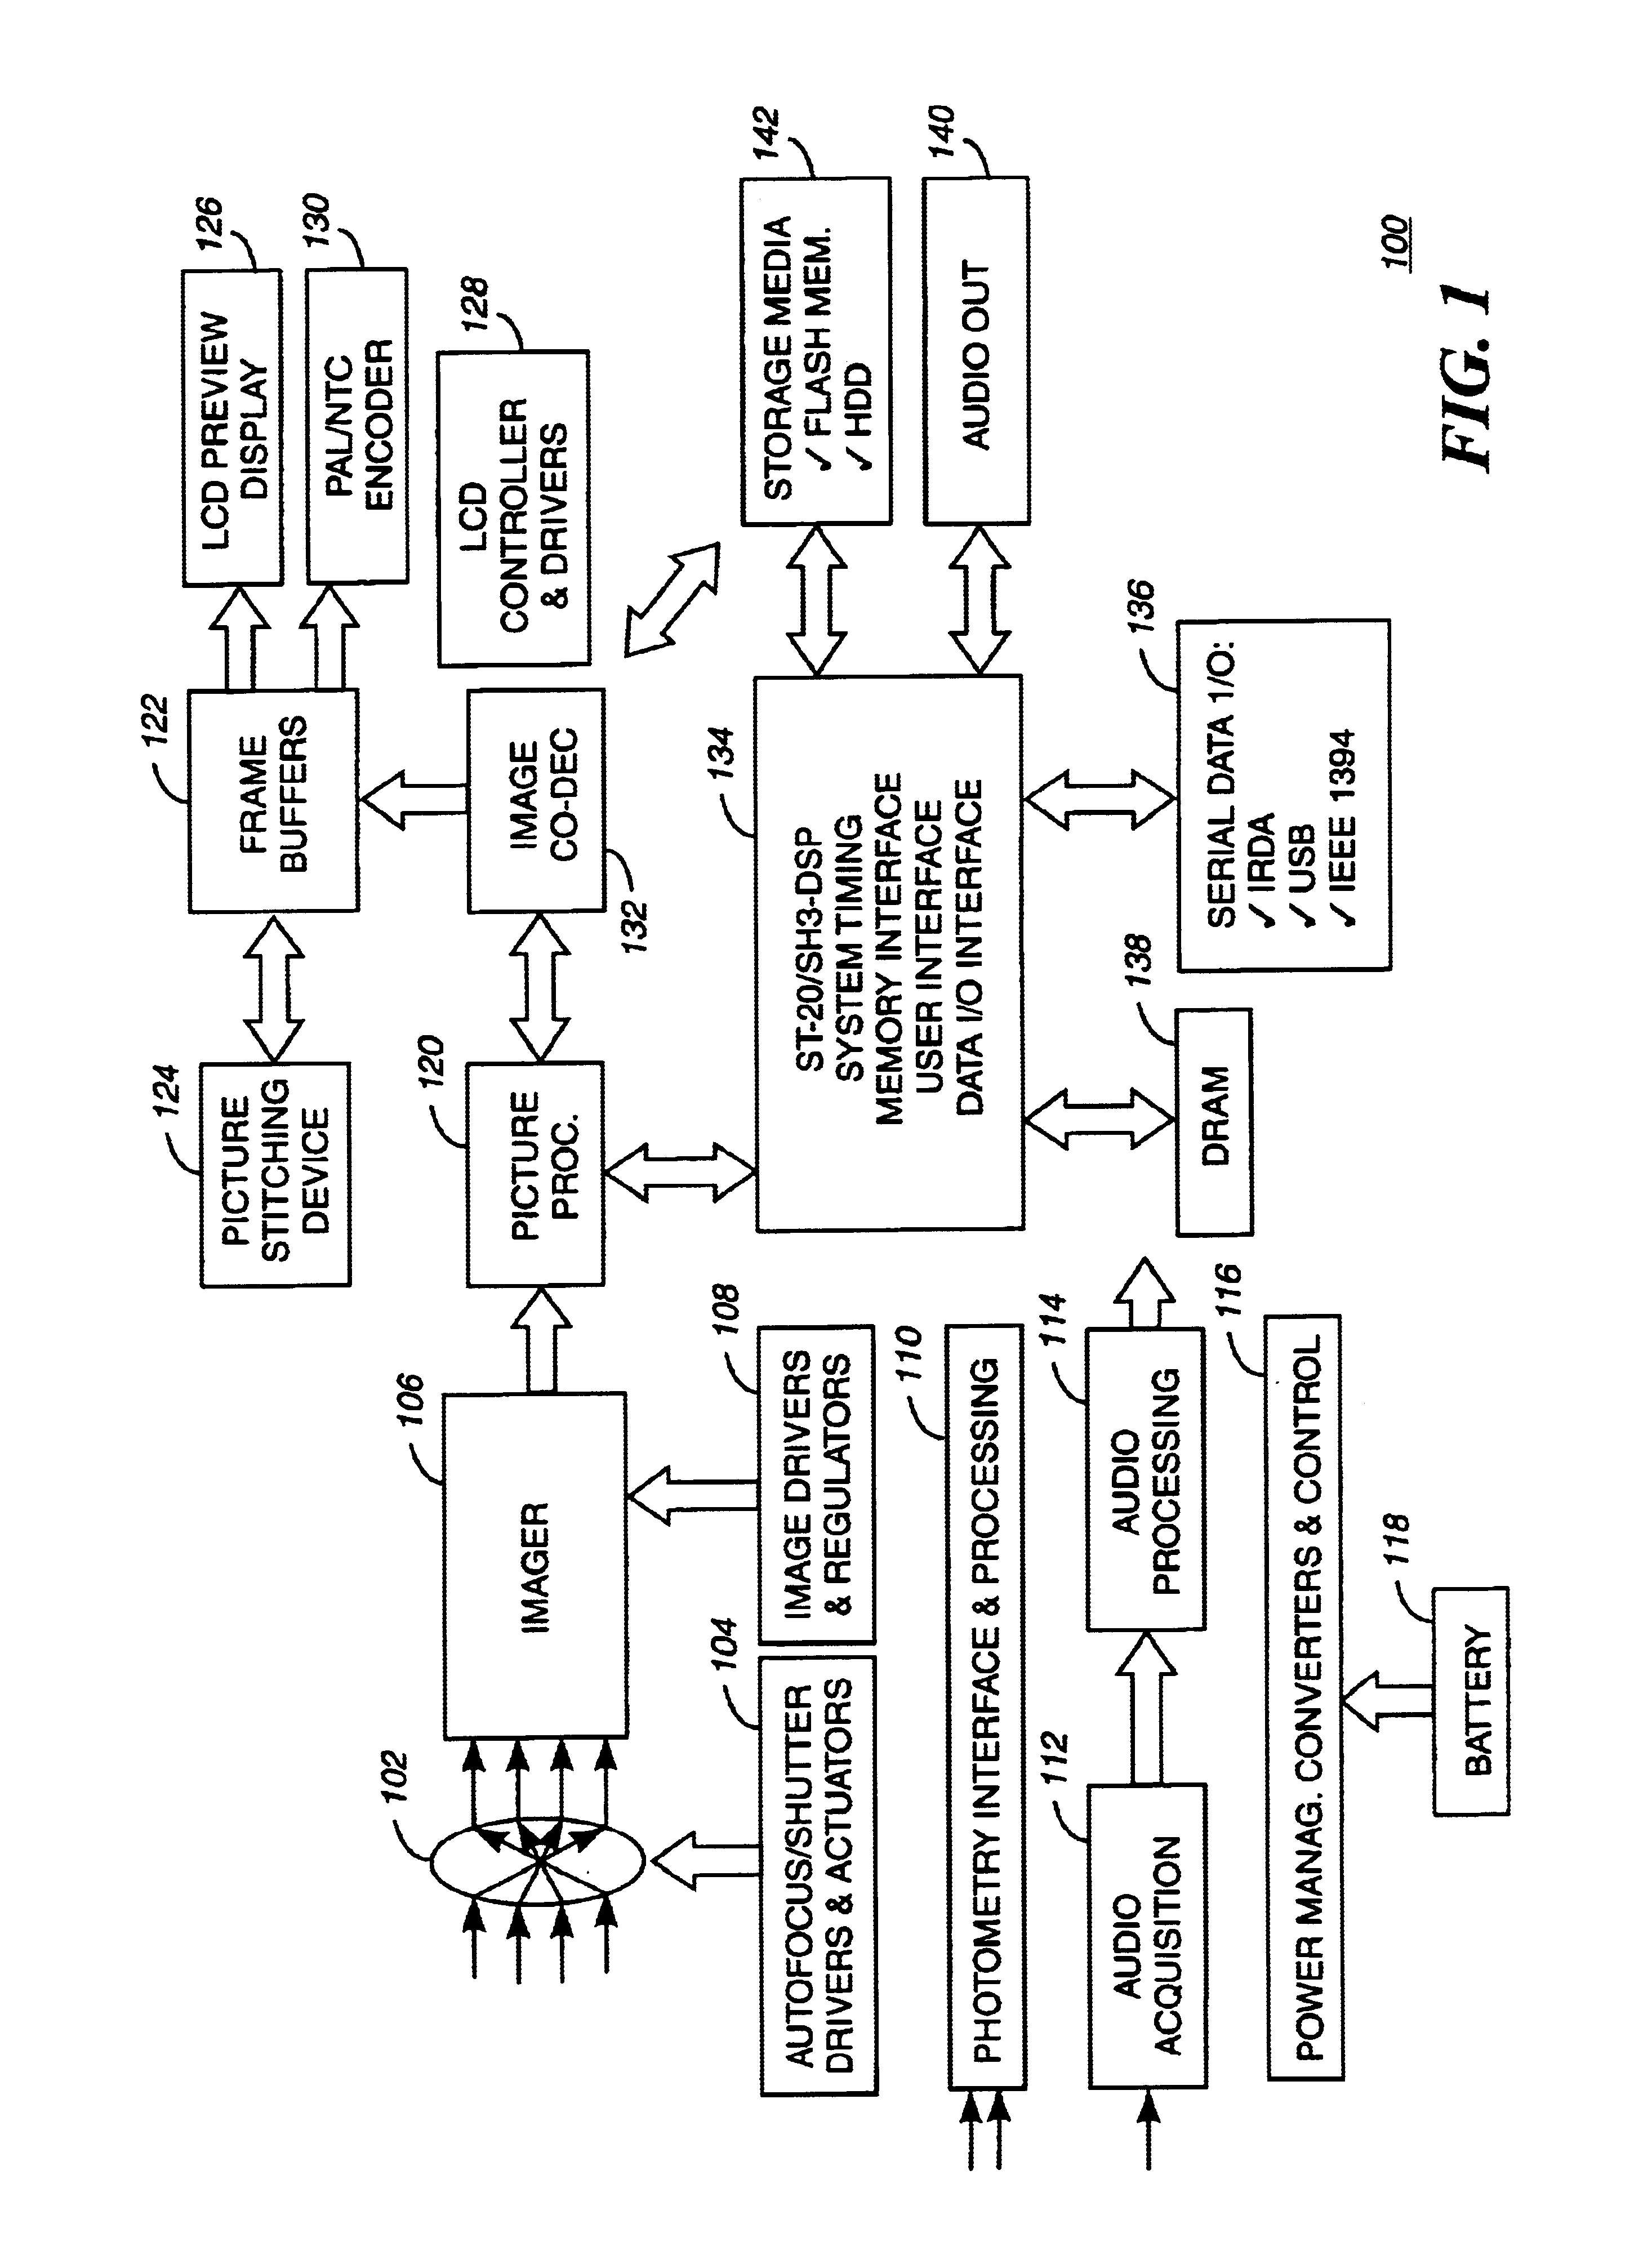 Perspective correction device for panoramic digital camera